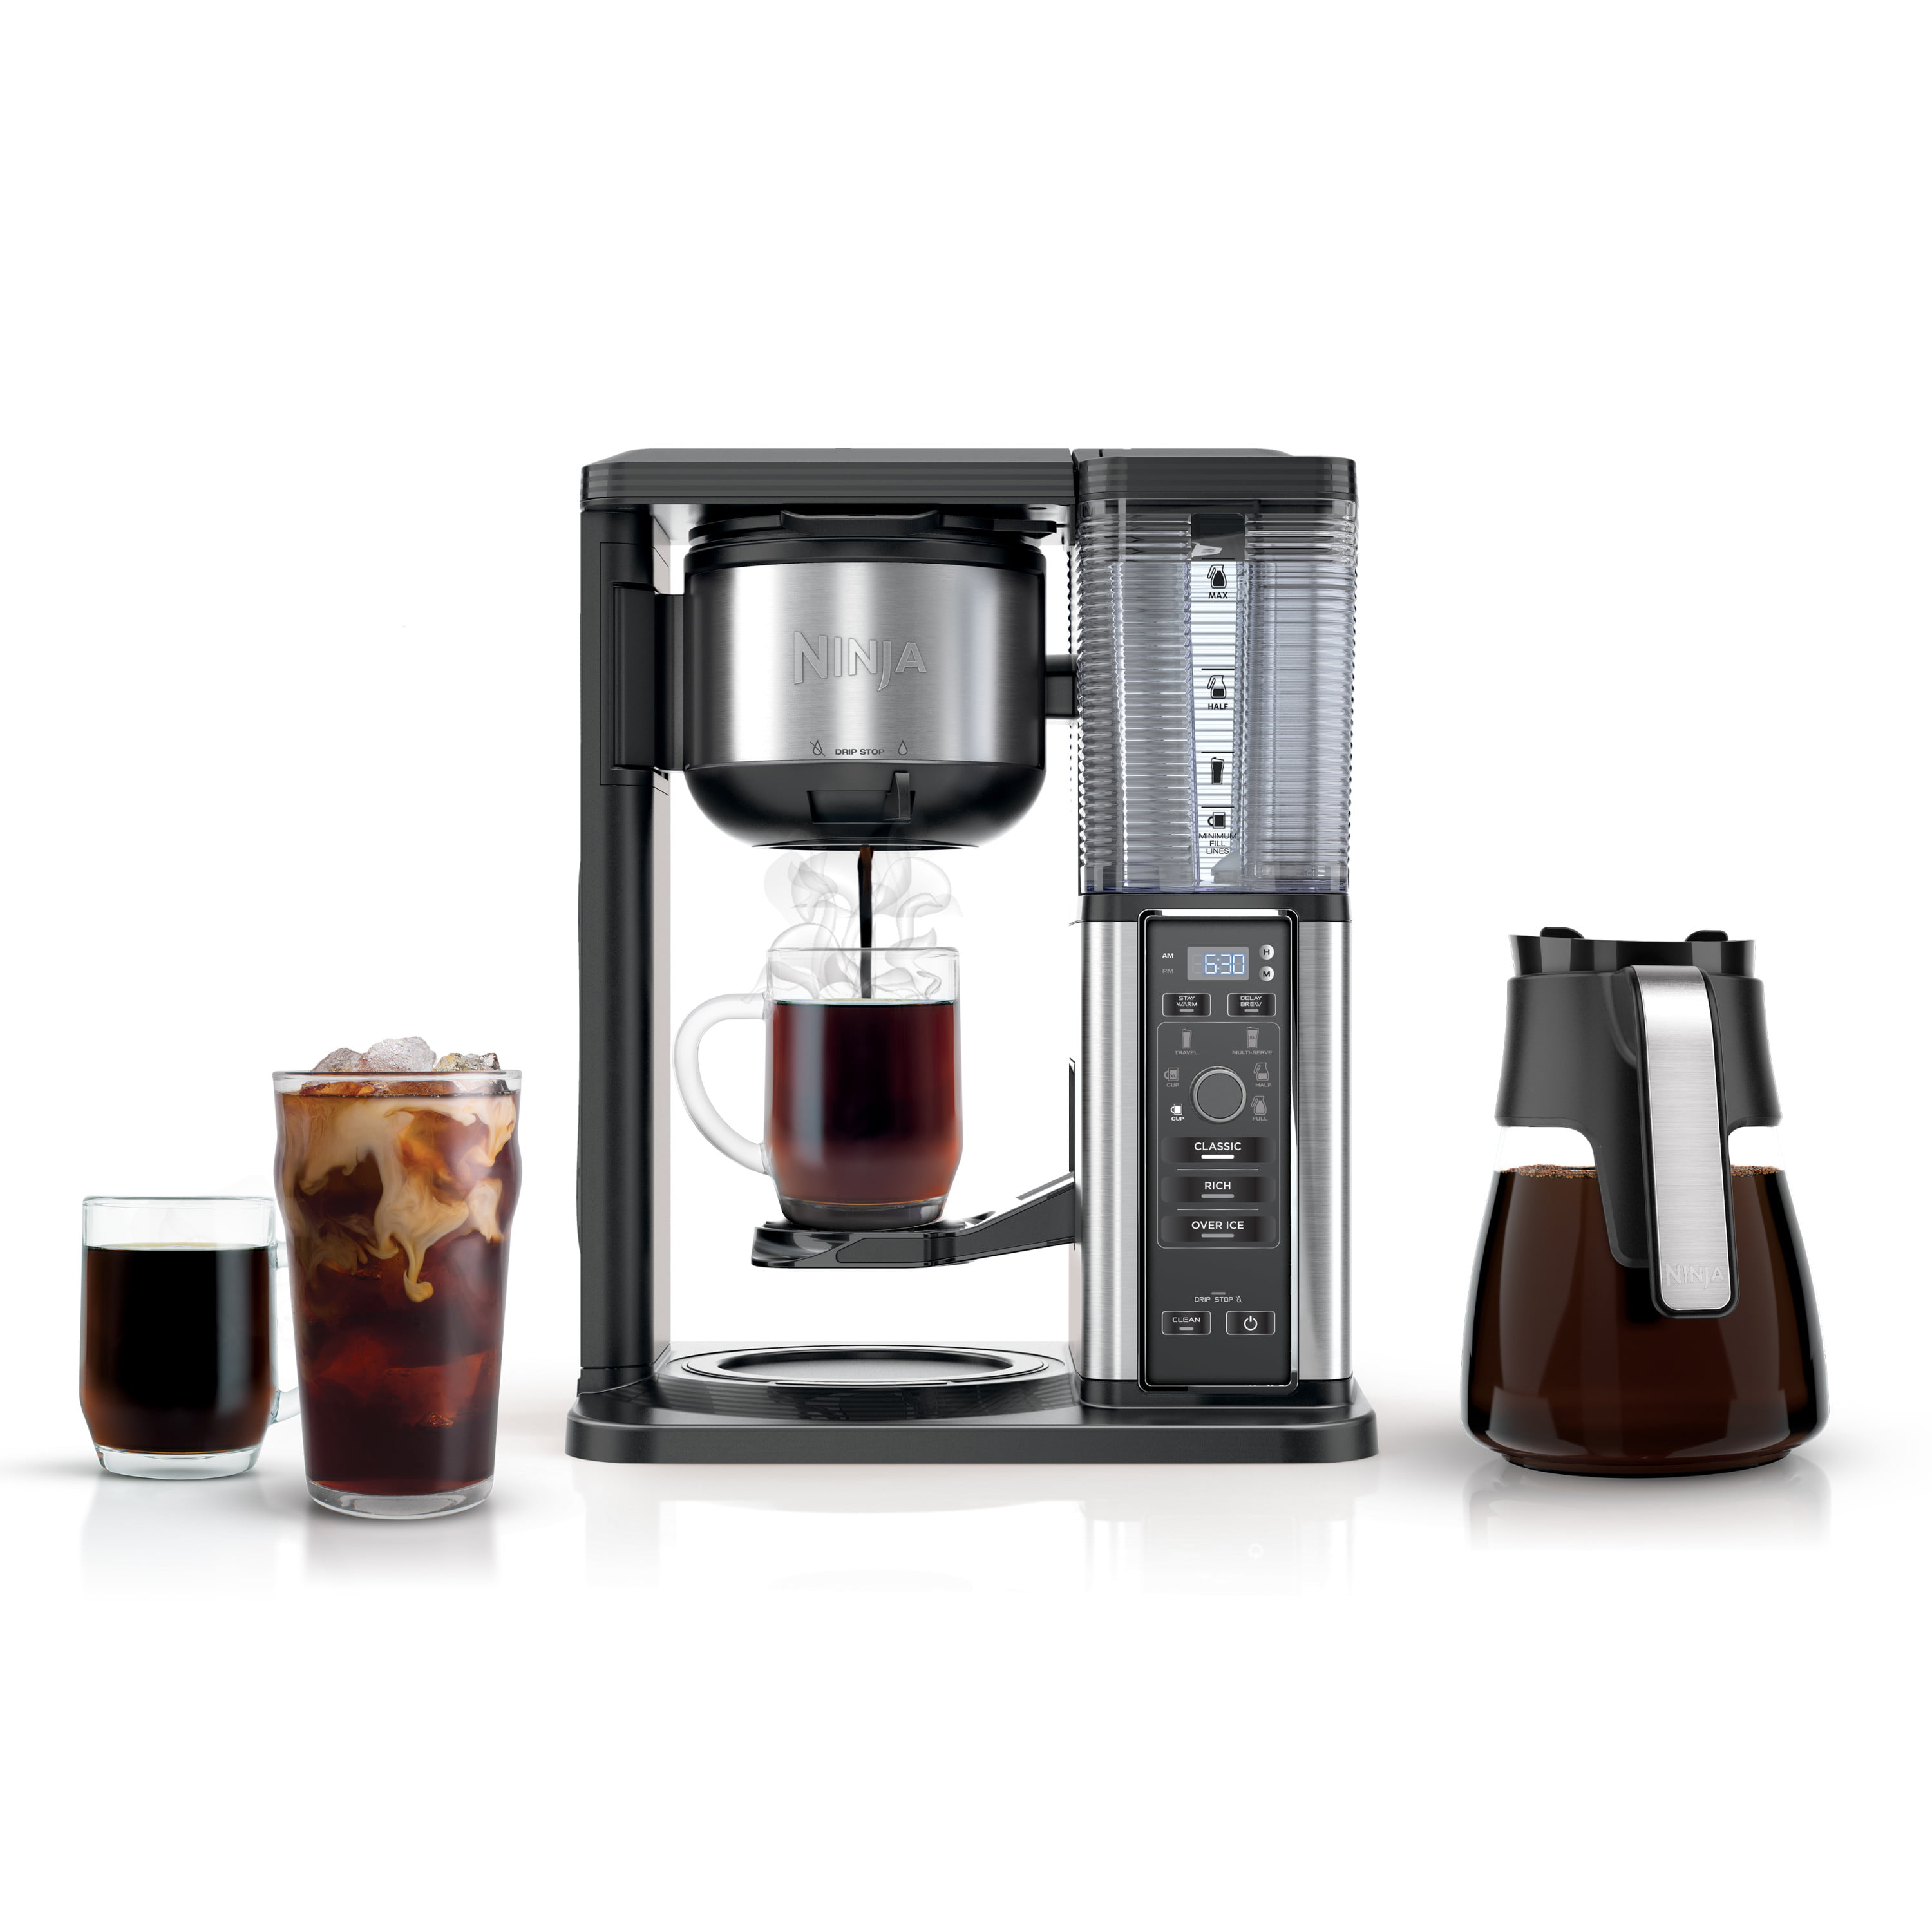 Ninja Hot & Iced, Single Serve or Drip Coffee System 10 Cup Glass Carafe $98 + Free Shipping